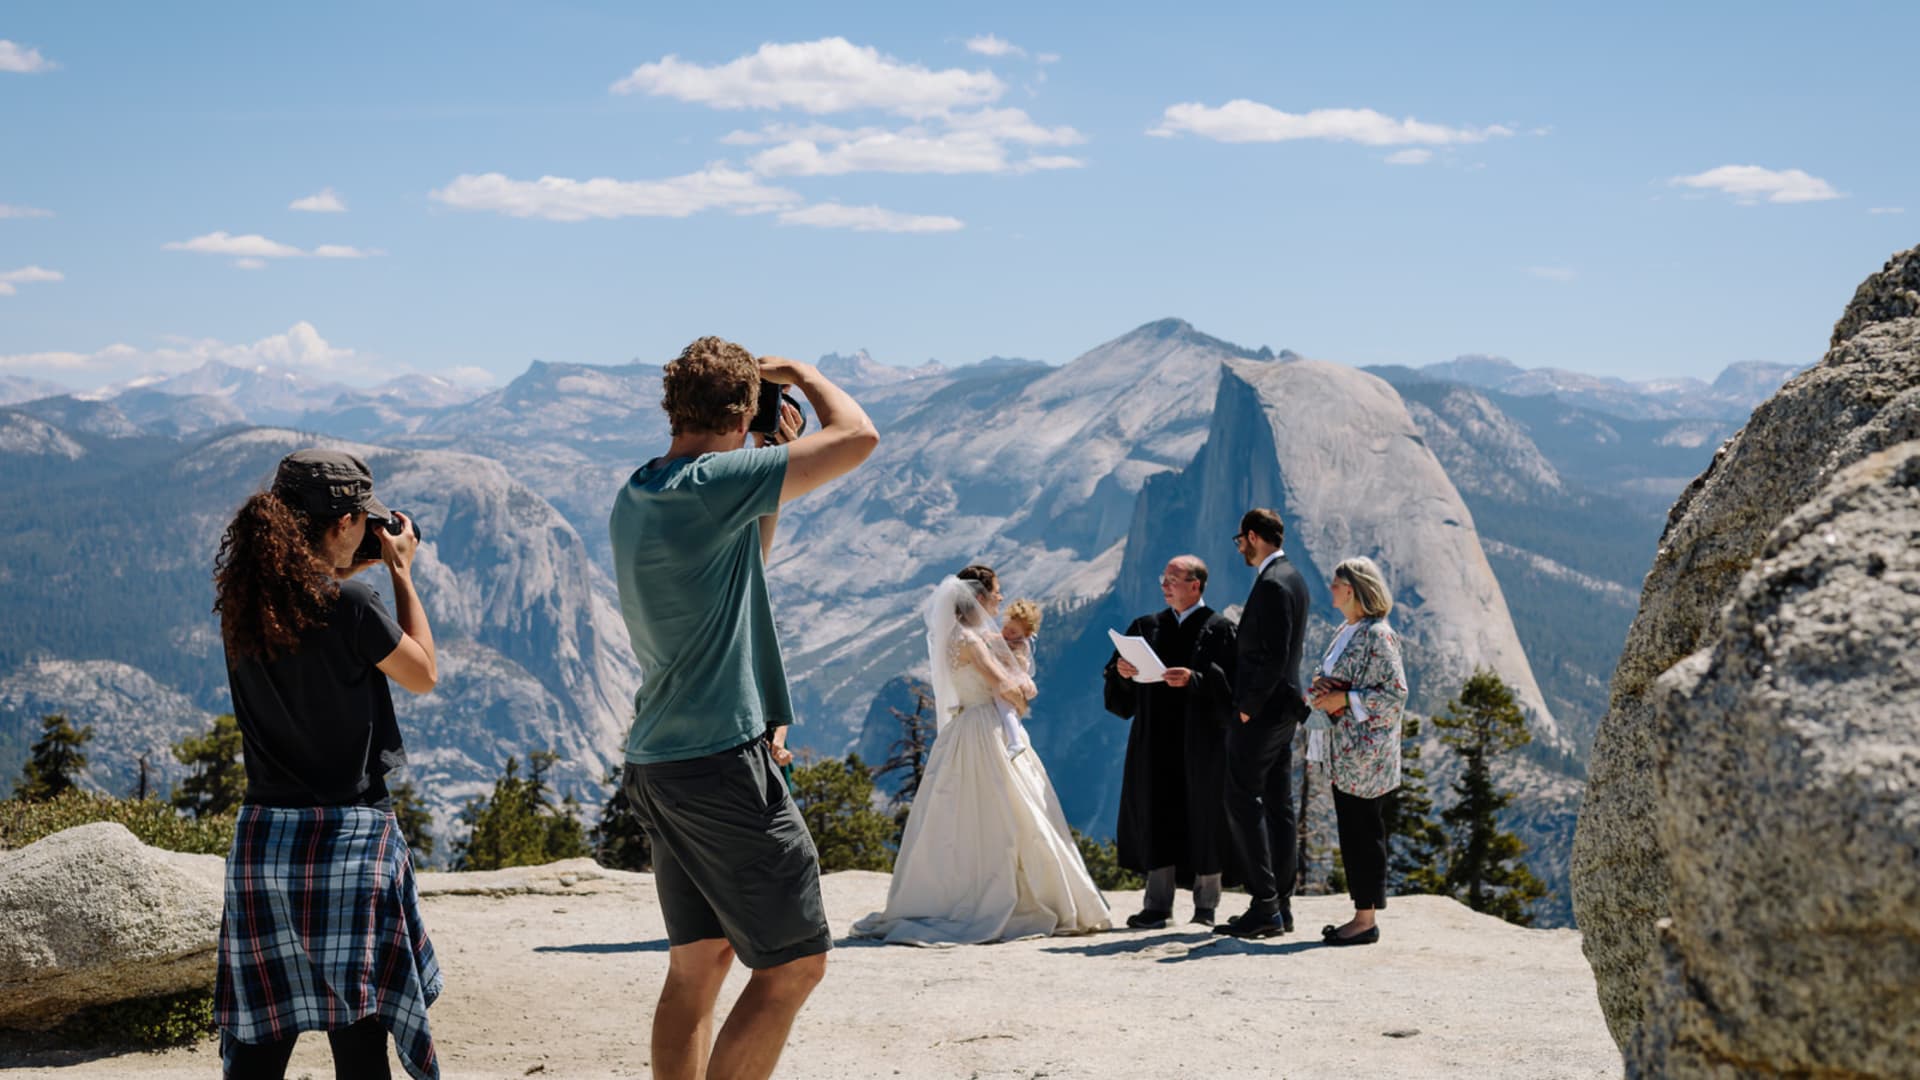 Krause and Alvin's photograph business specializes in small ceremonies and elopements in Yosemite National Park and Sequoia National Park.